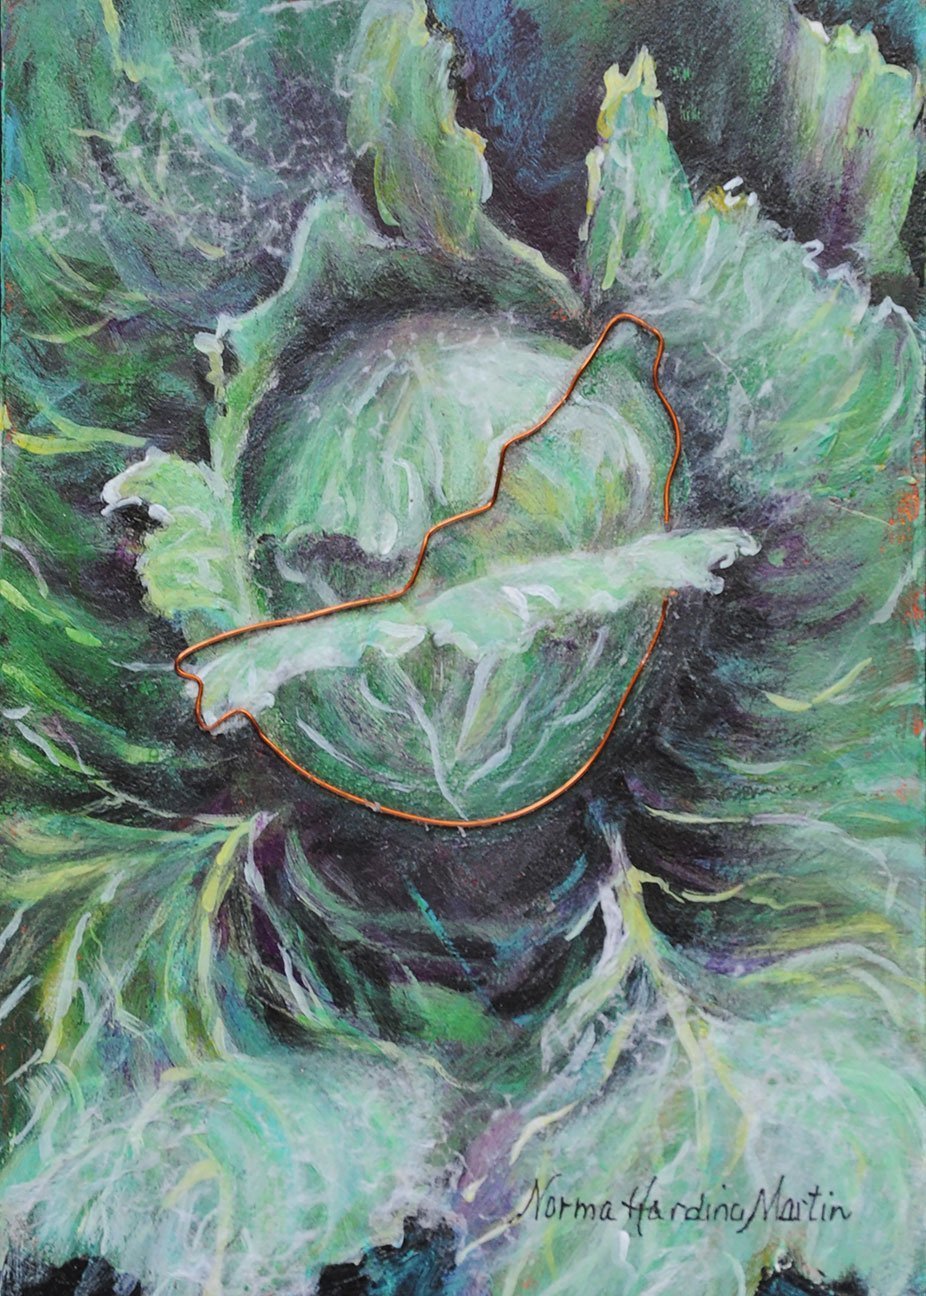 "Cabbage Patch" by Norma Martin